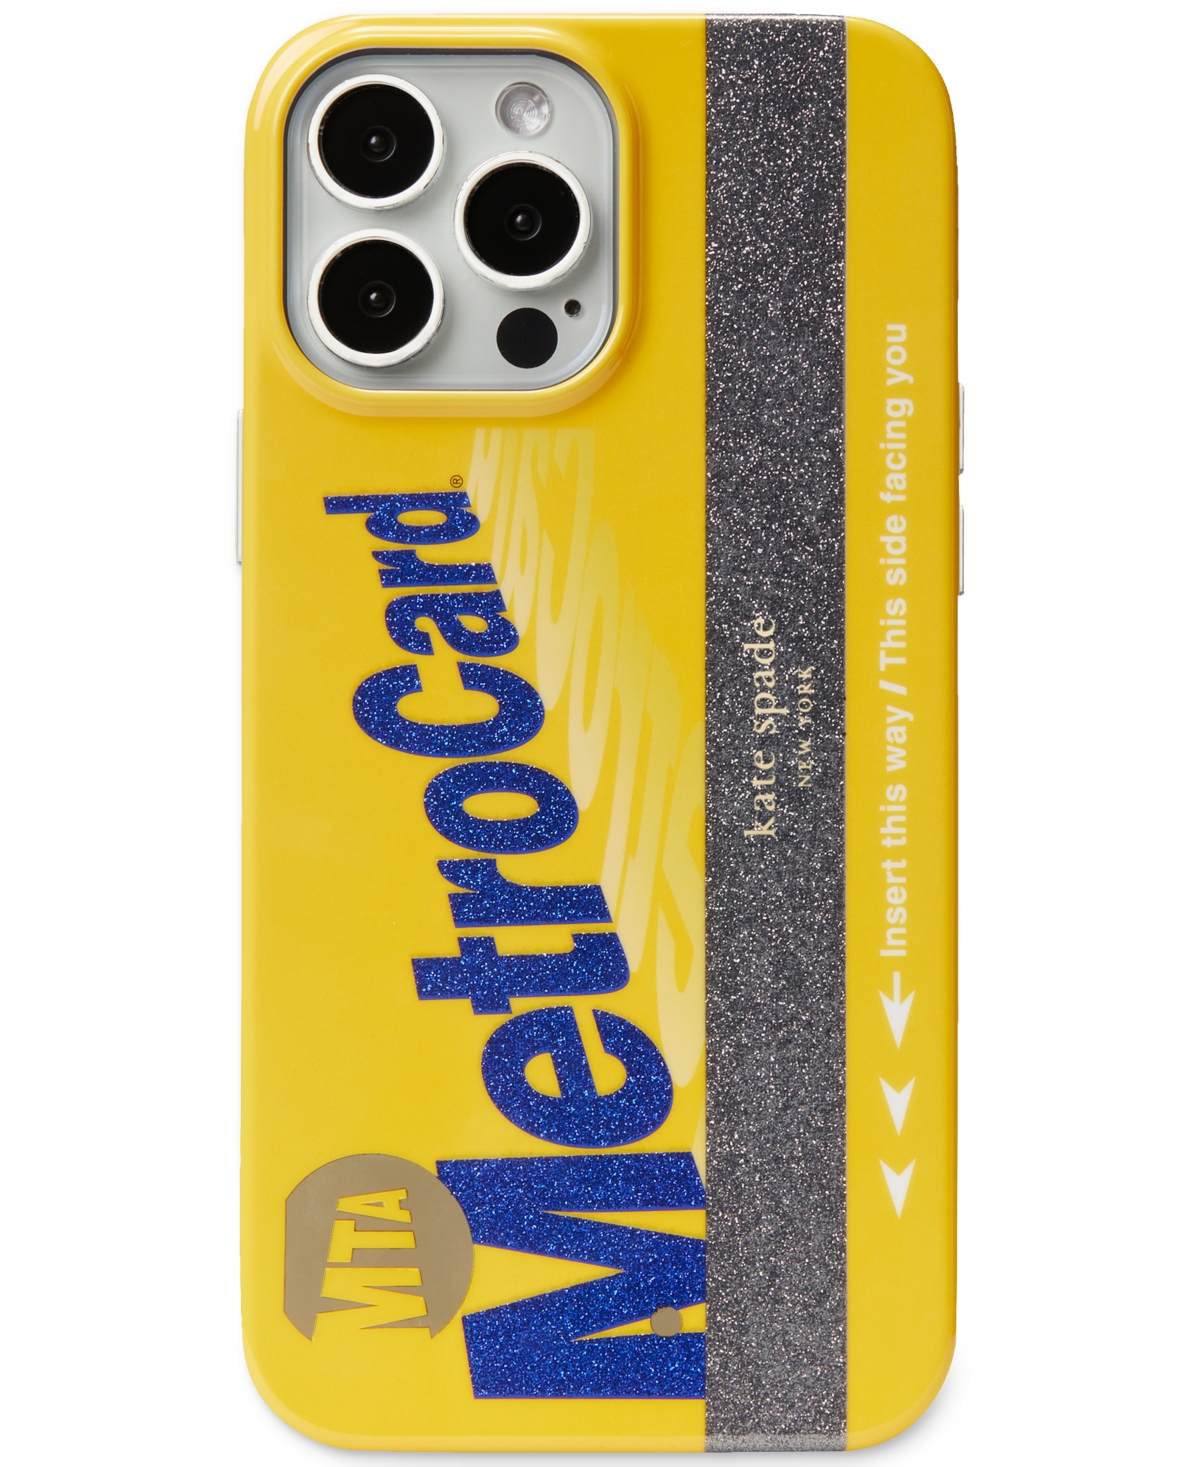 On a Roll Metrocard Printed Phone Case 13 Pro Max - High Noon Multi